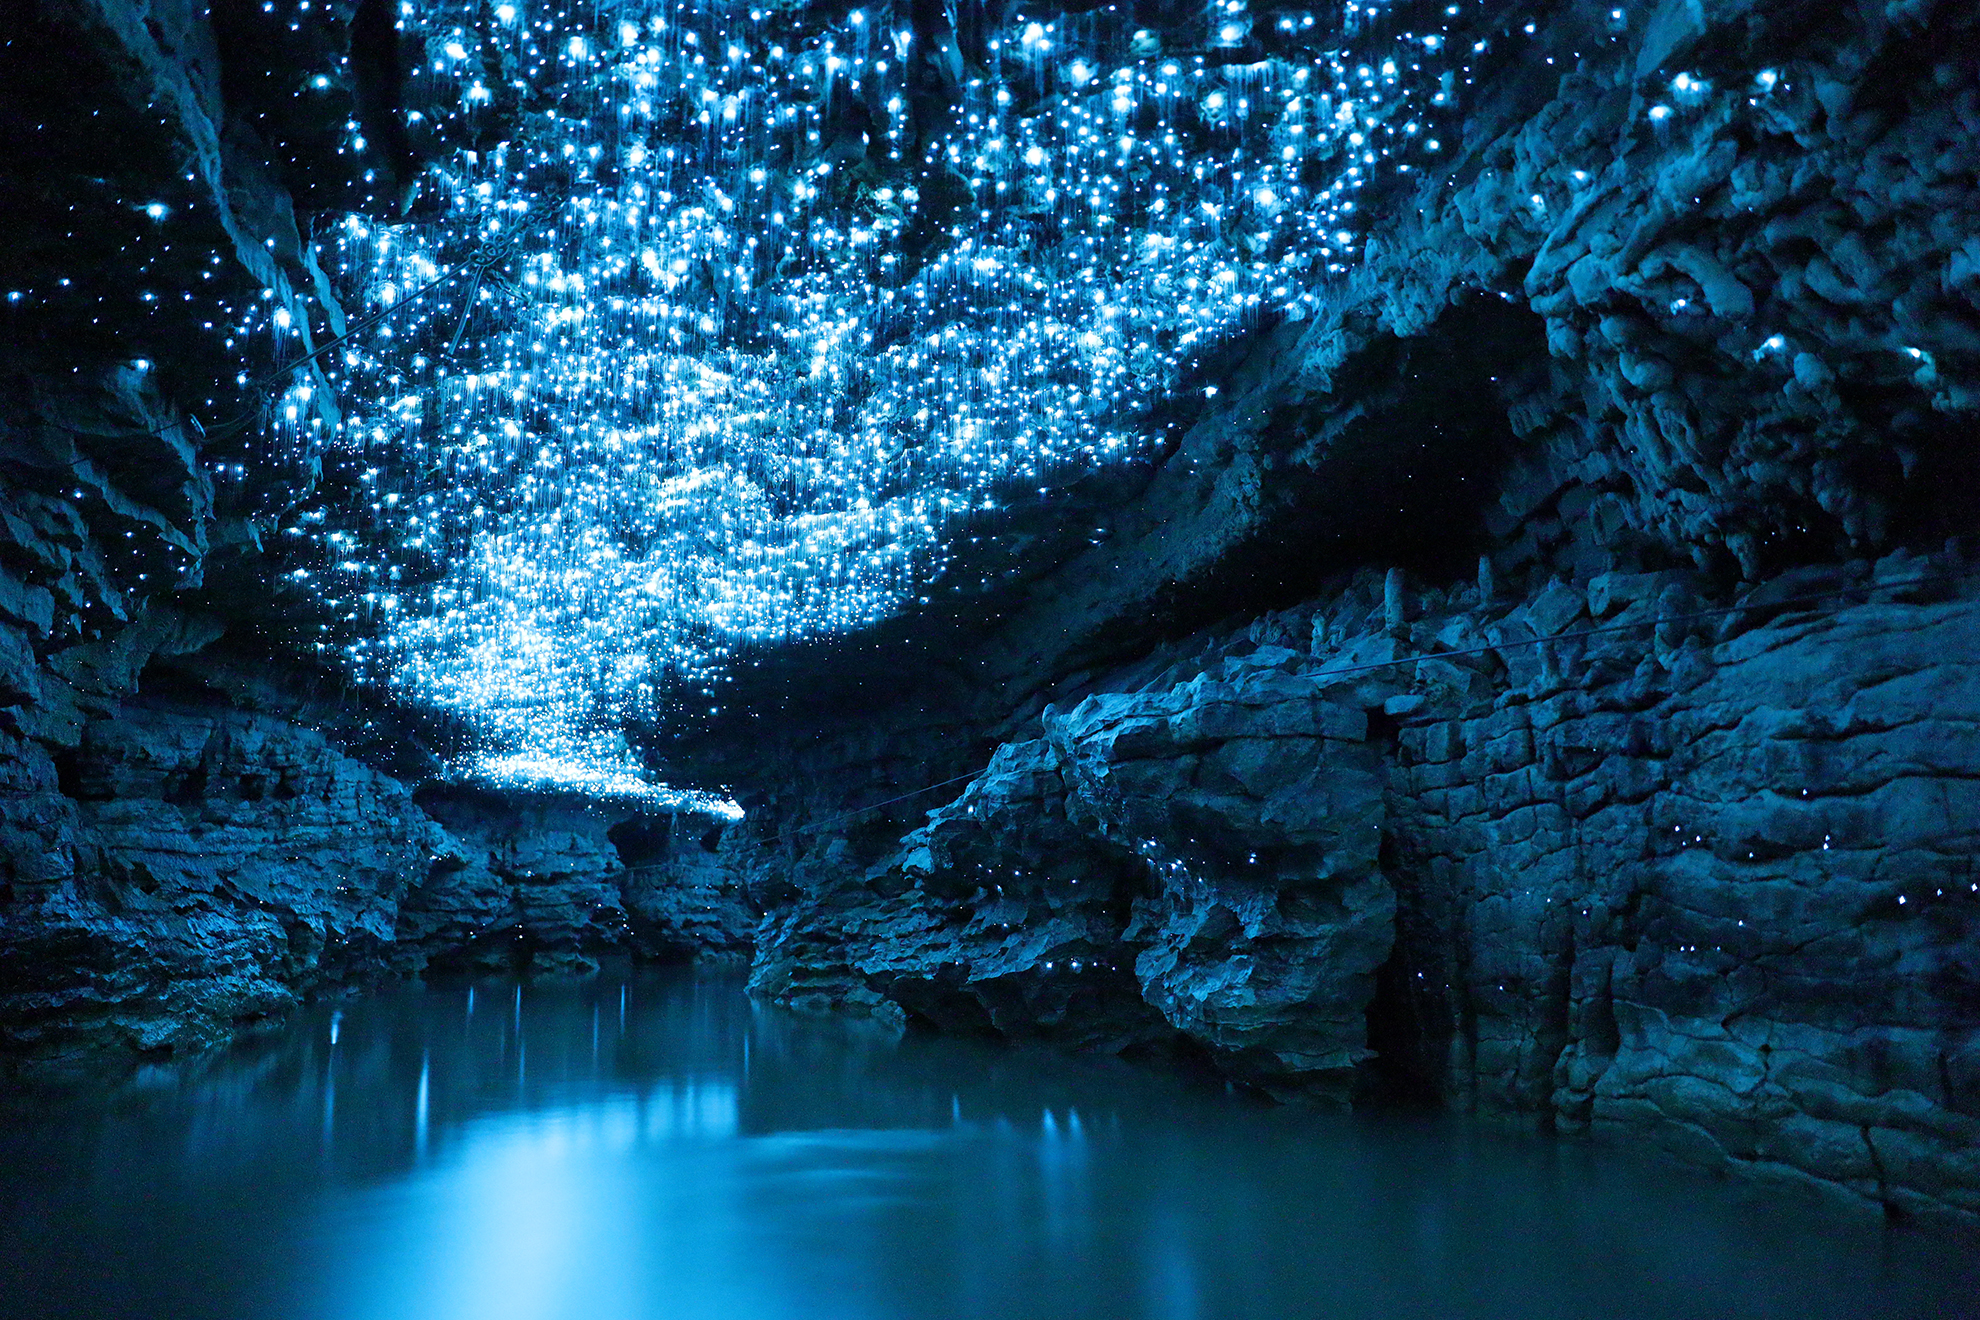 Still water surrounded by a rock formation with a blue hue due to the shimmering blue and white lights at the top of the frame